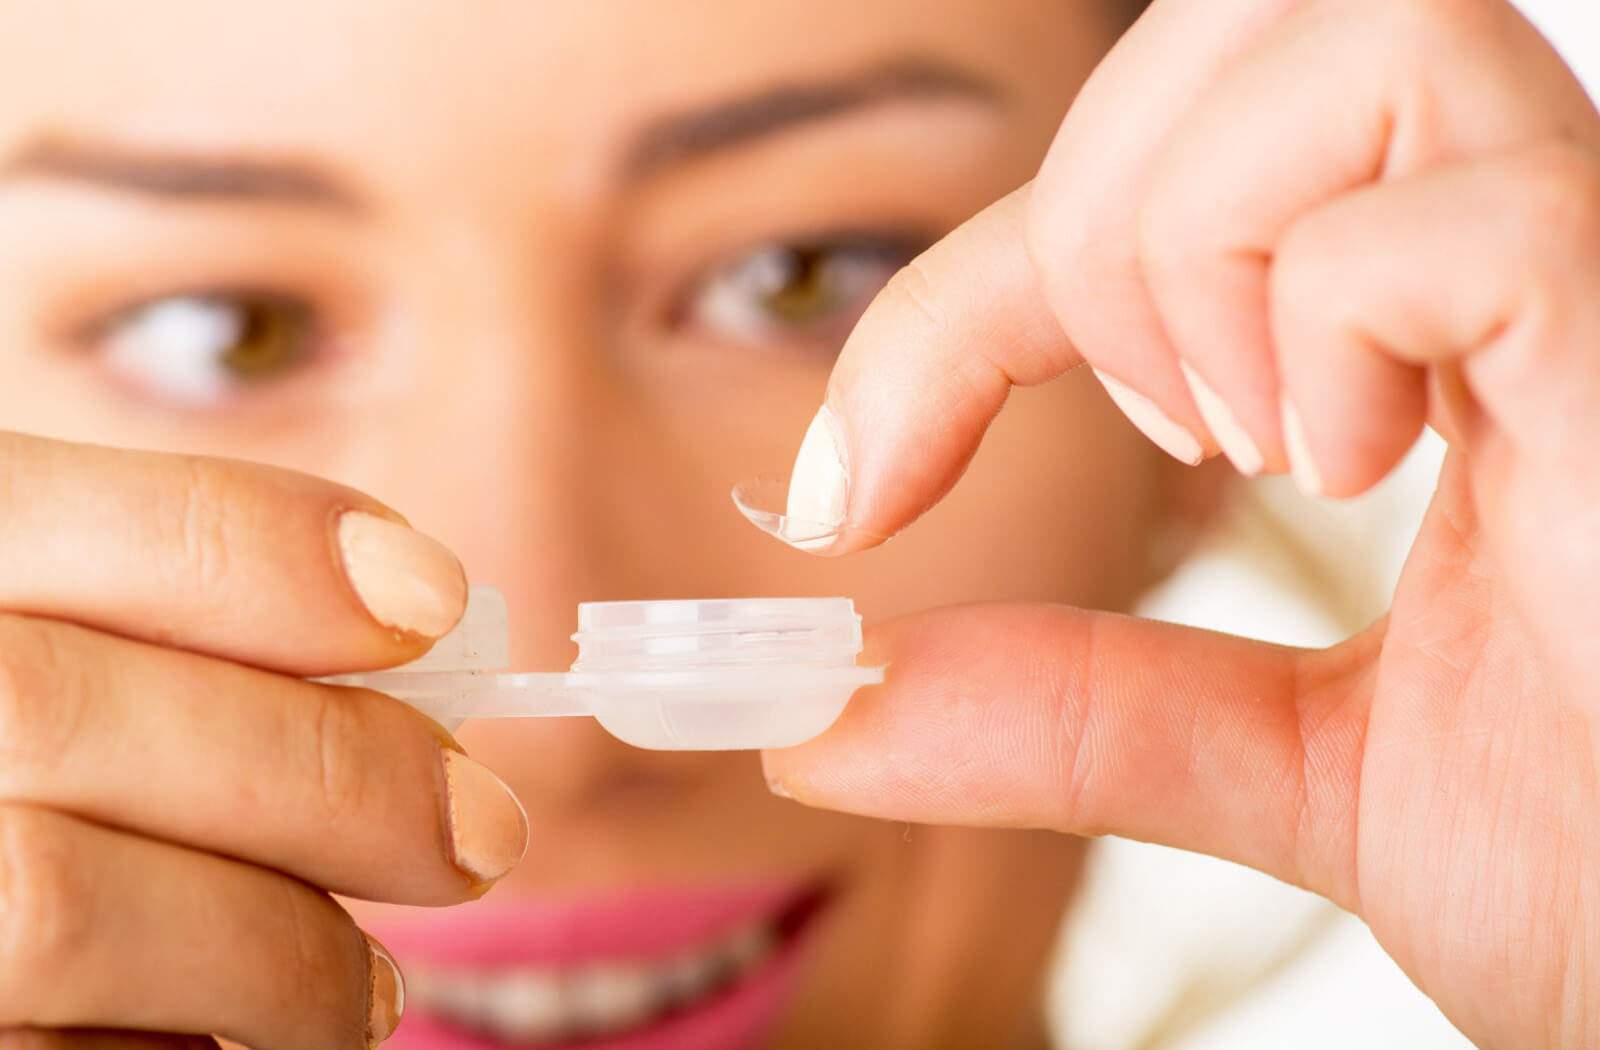 A woman storing her contact lens in a plastic contact lens container.